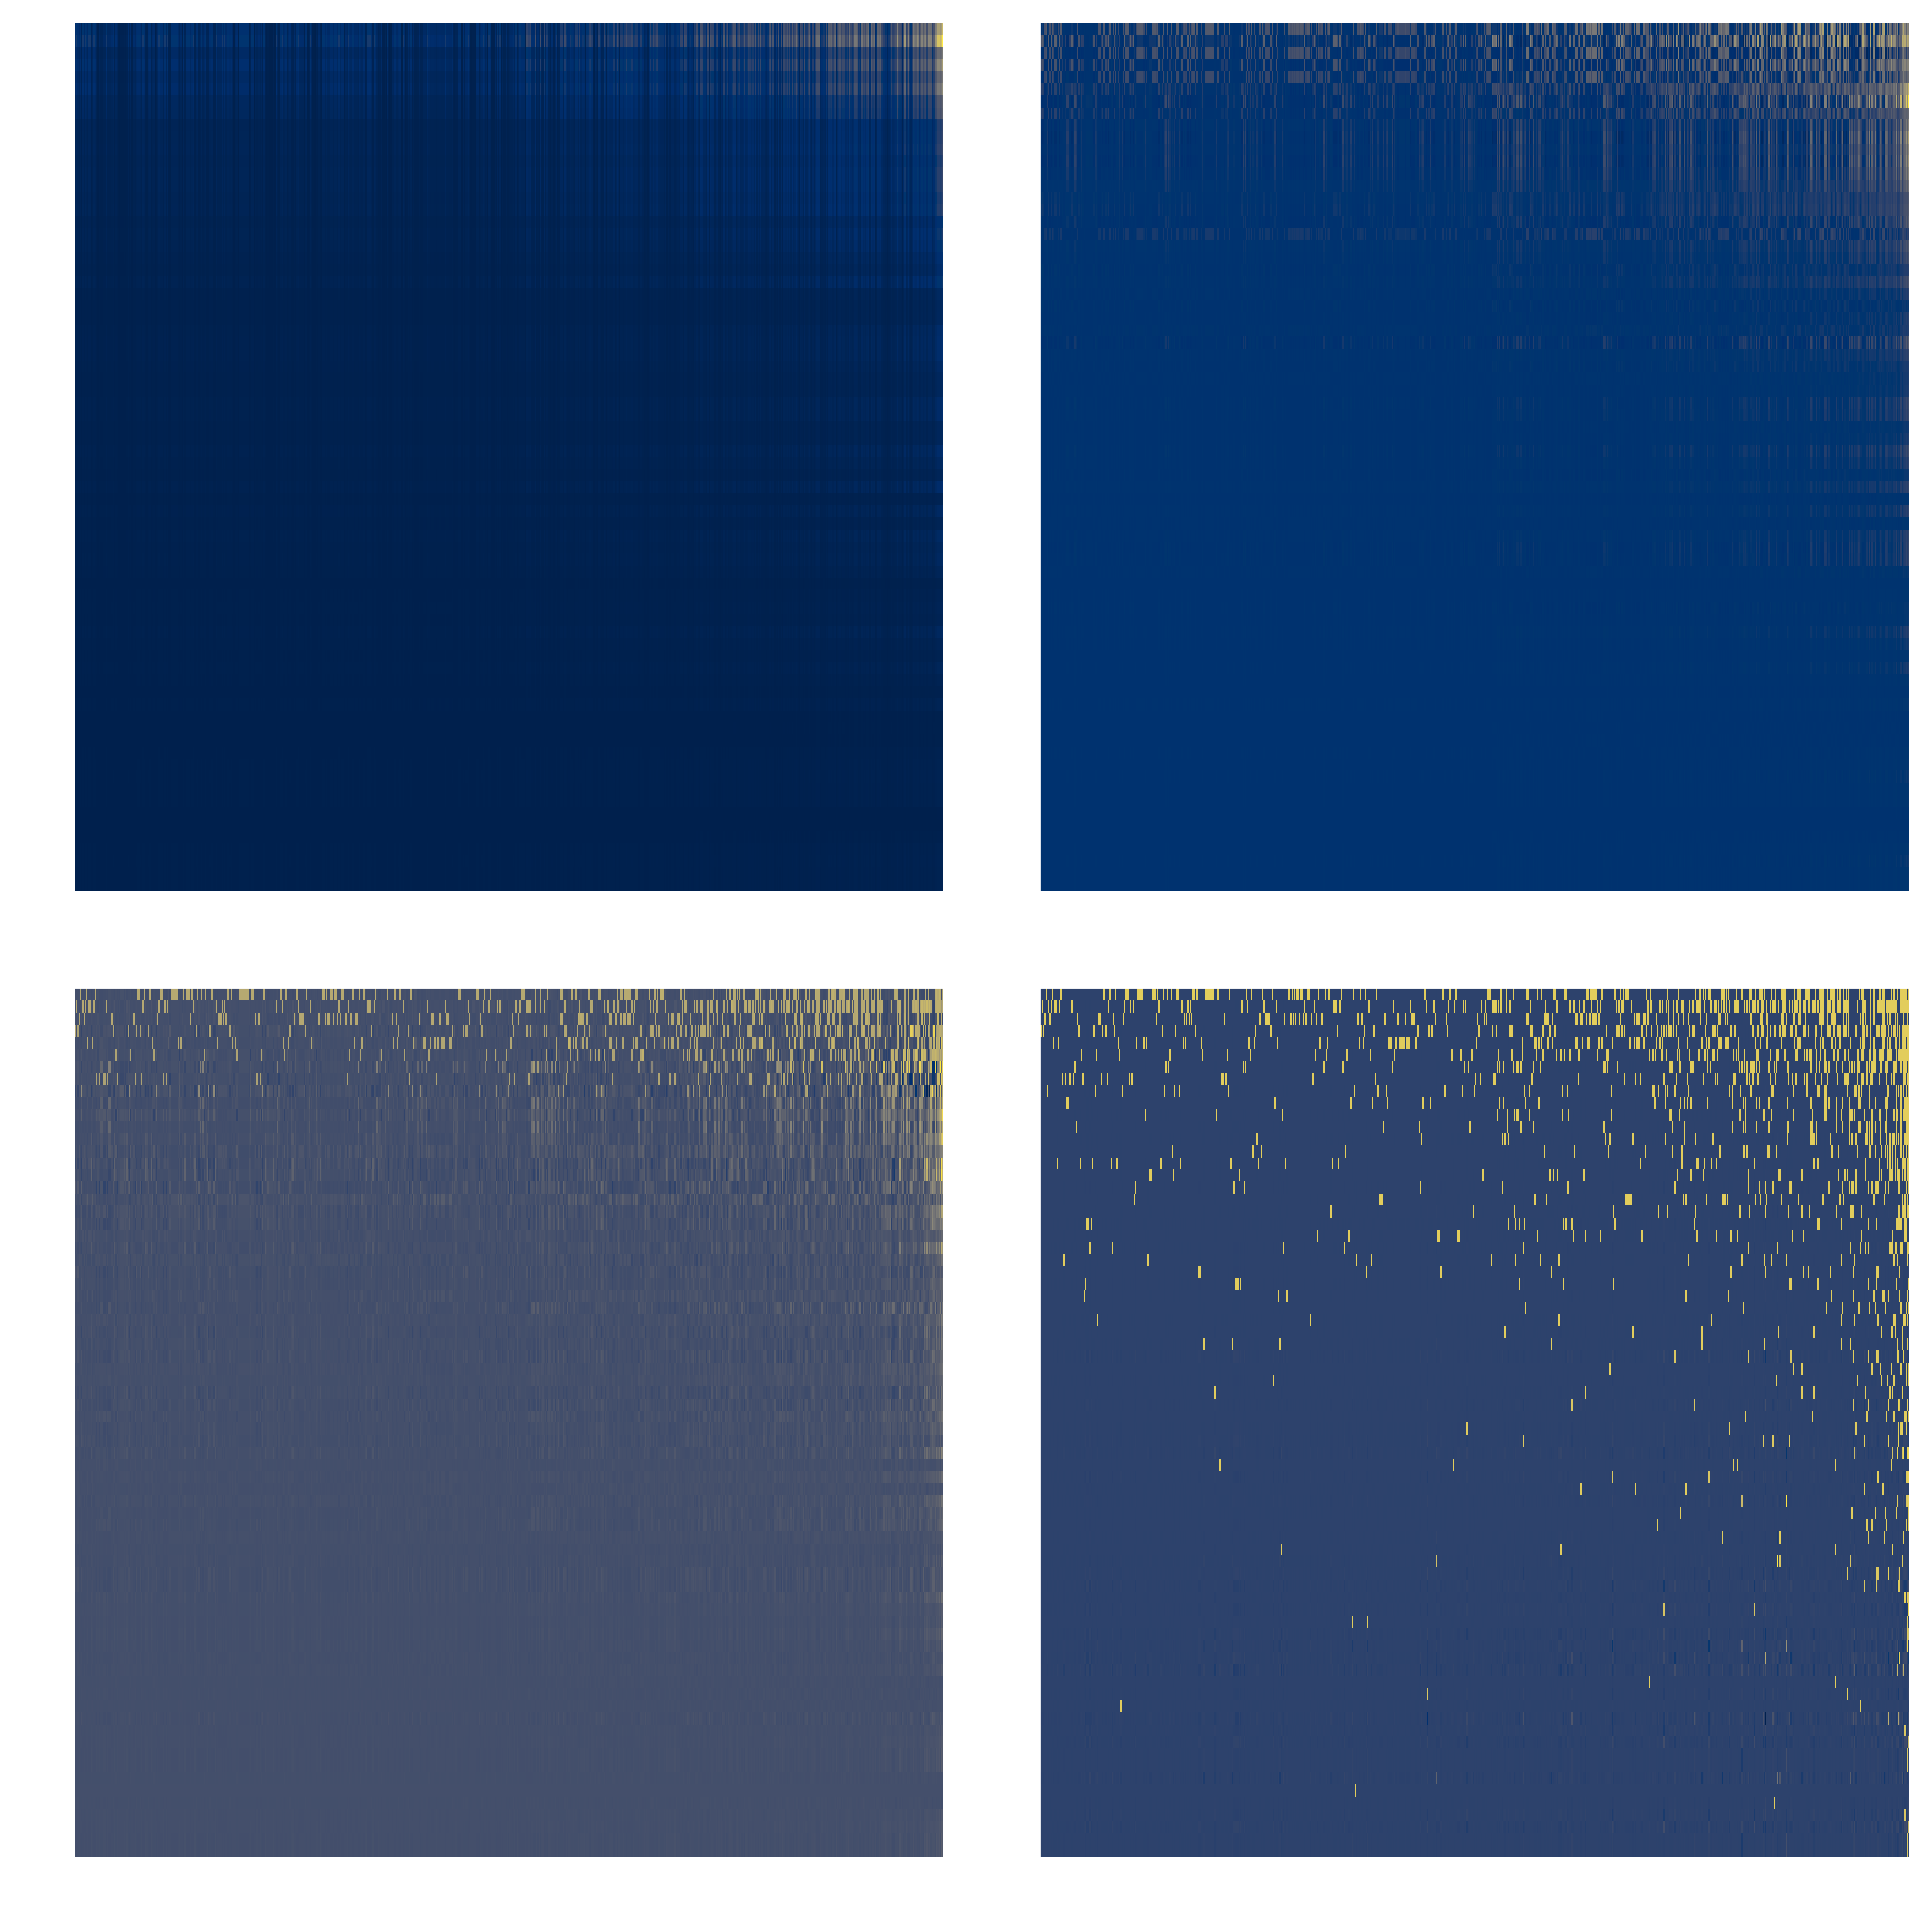 Figure 1: Overview of the dataset (yellow means interaction is more likely, blue means interactions is less likely) at different levels of approximation. At rank very low rank (top row; from left to right, r=1 and r=3) the matrix is mostly capturing the degree of the different species. At higher ranks (bottom row; from left to right, r=10 and r=60), the matrix is capturing increasing differences in species interactions.